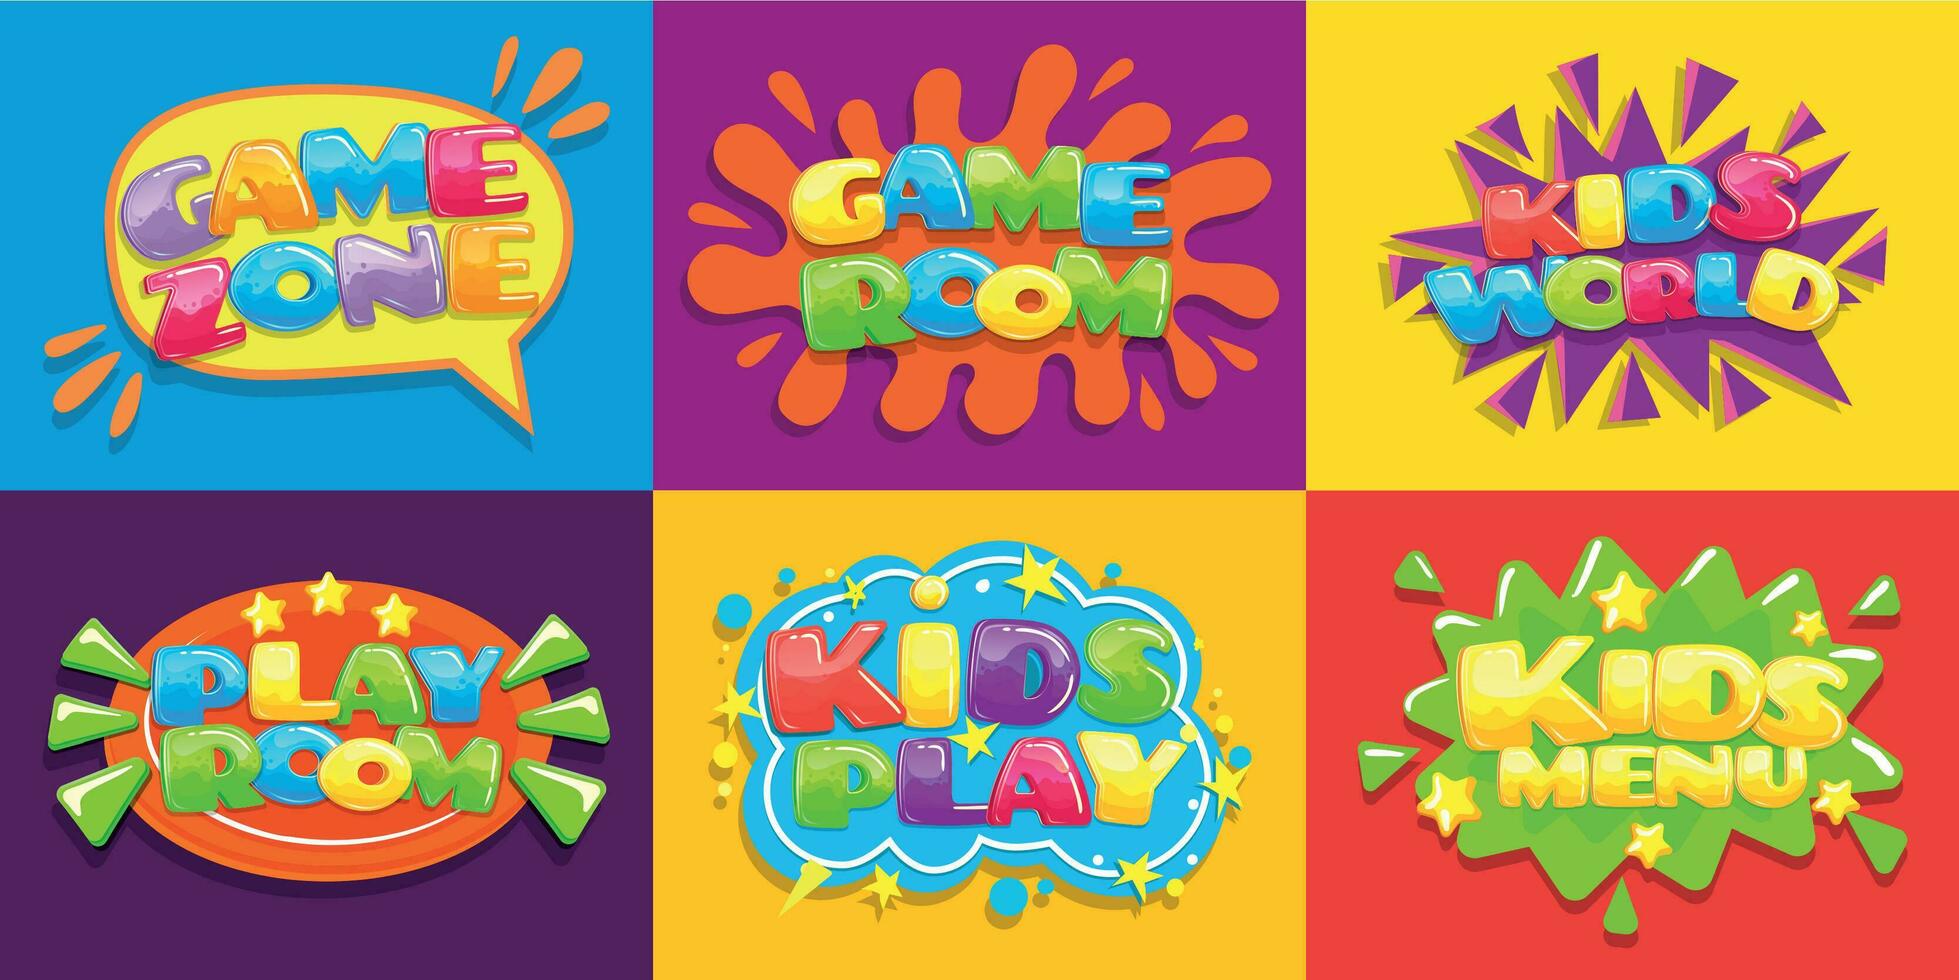 Game room posters. Fun kids playroom, games playing zone for young kid and kids menu vector illustration background